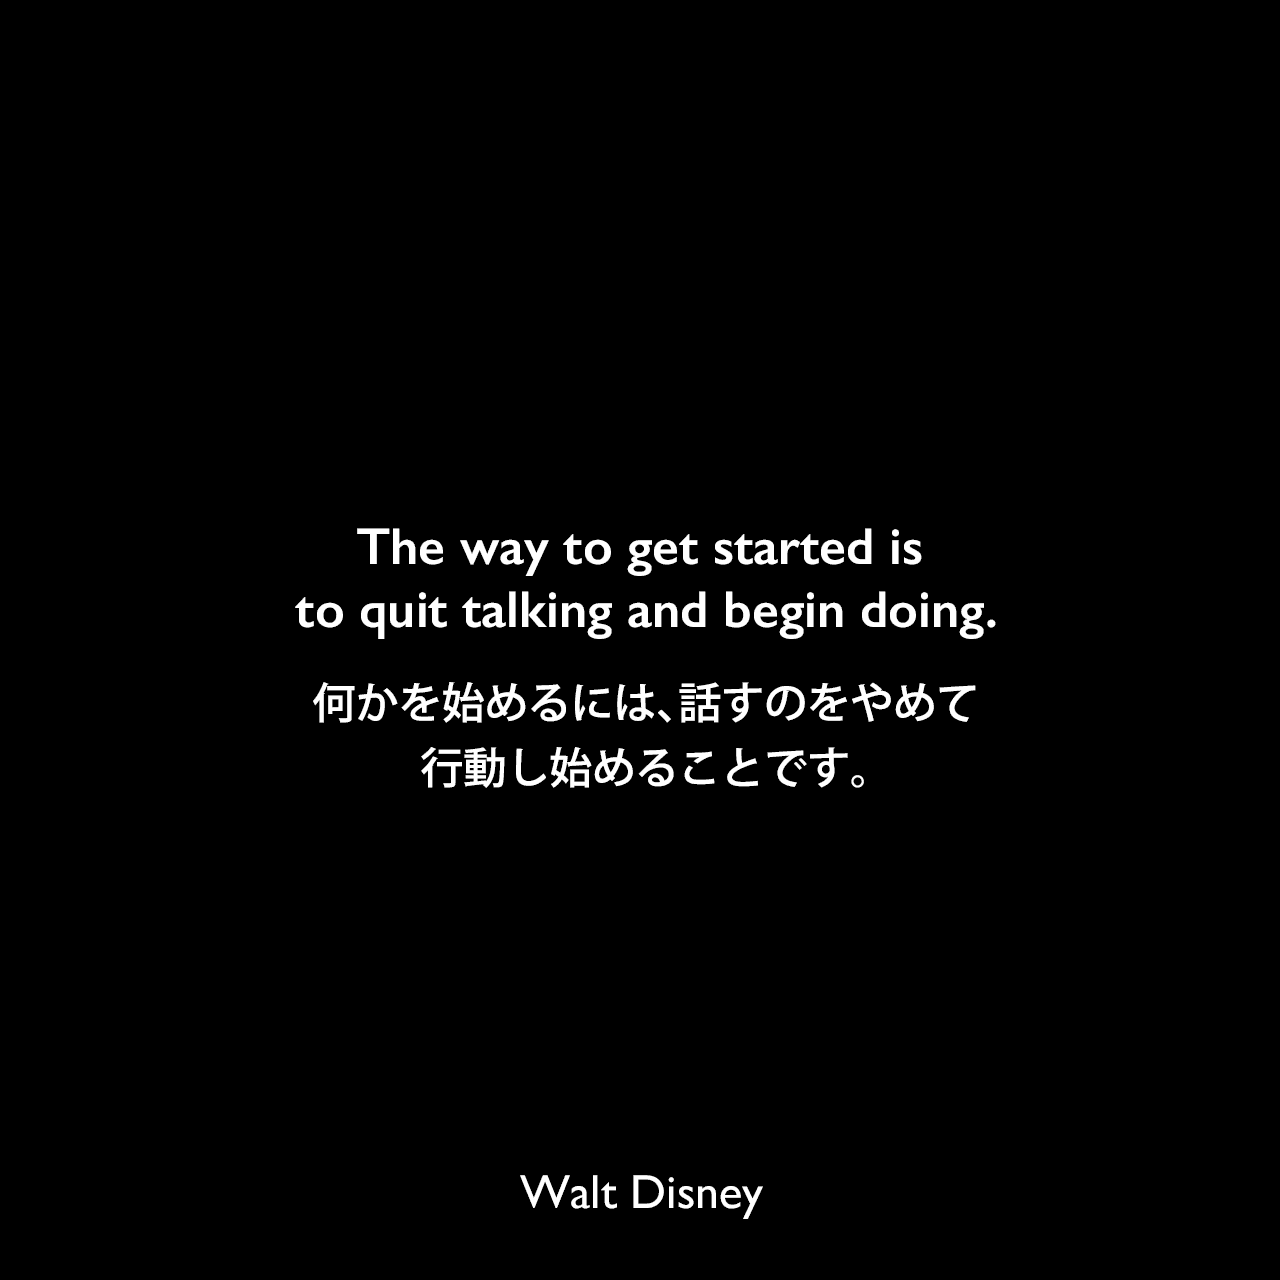 The way to get started is to quit talking and begin doing.何かを始めるには、話すのをやめて行動し始めることです。